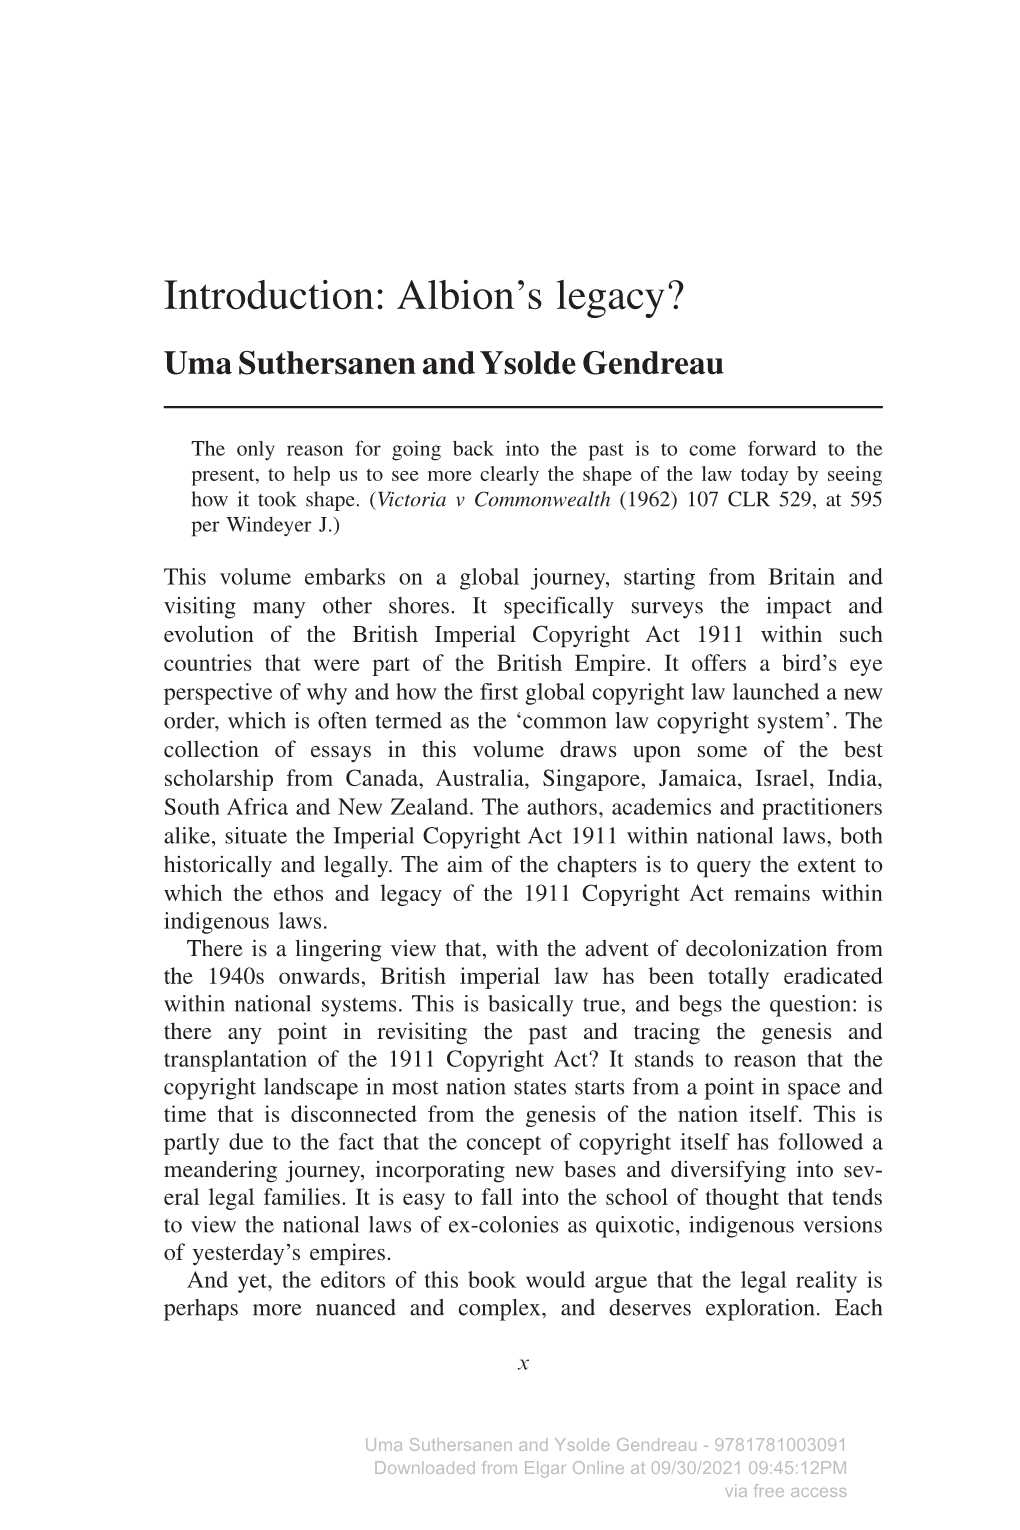 Introduction: Albion's Legacy?